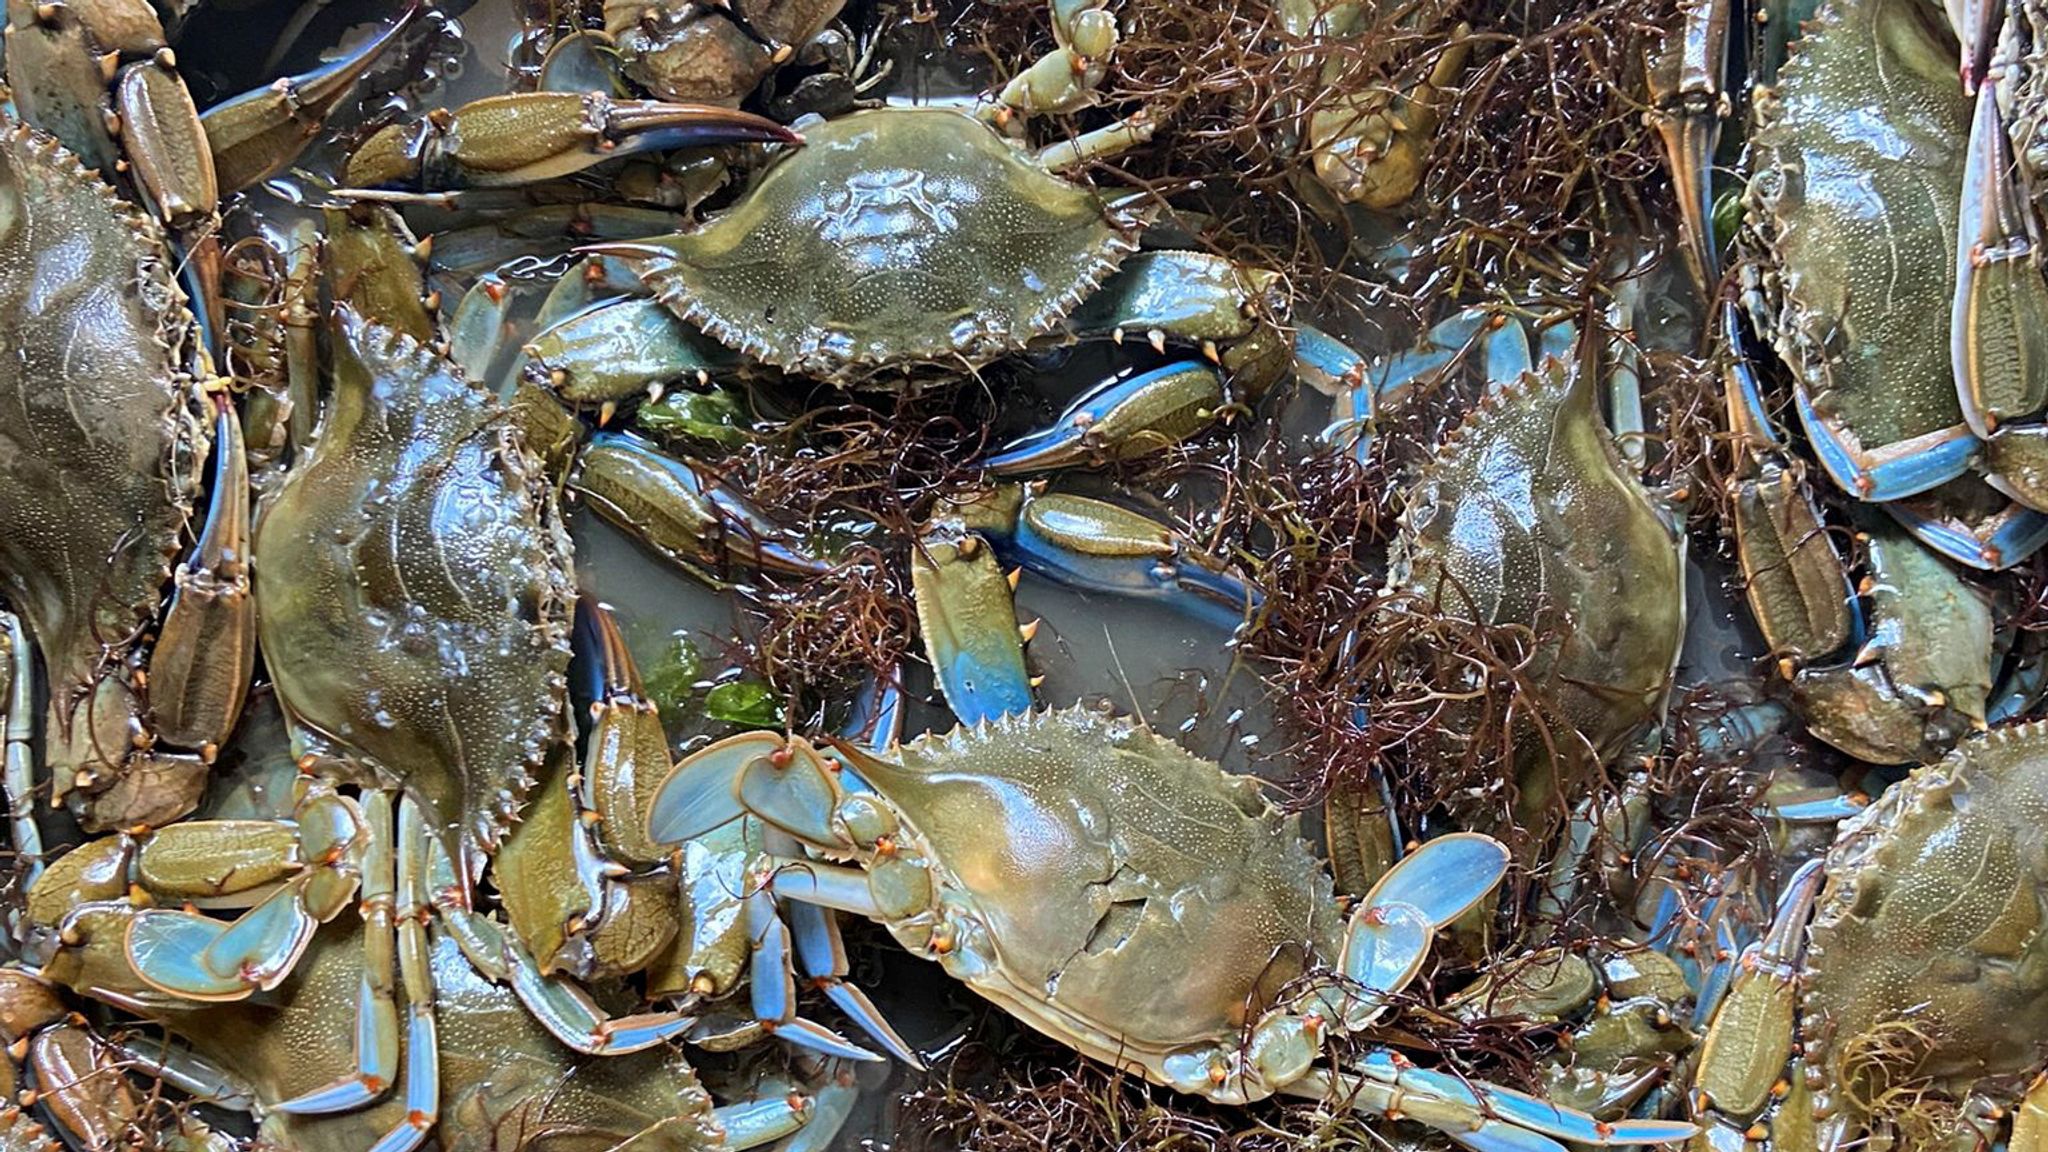  Italy tackles invasion of blue crabs by eating them italiane italiane italiane regione ricette 